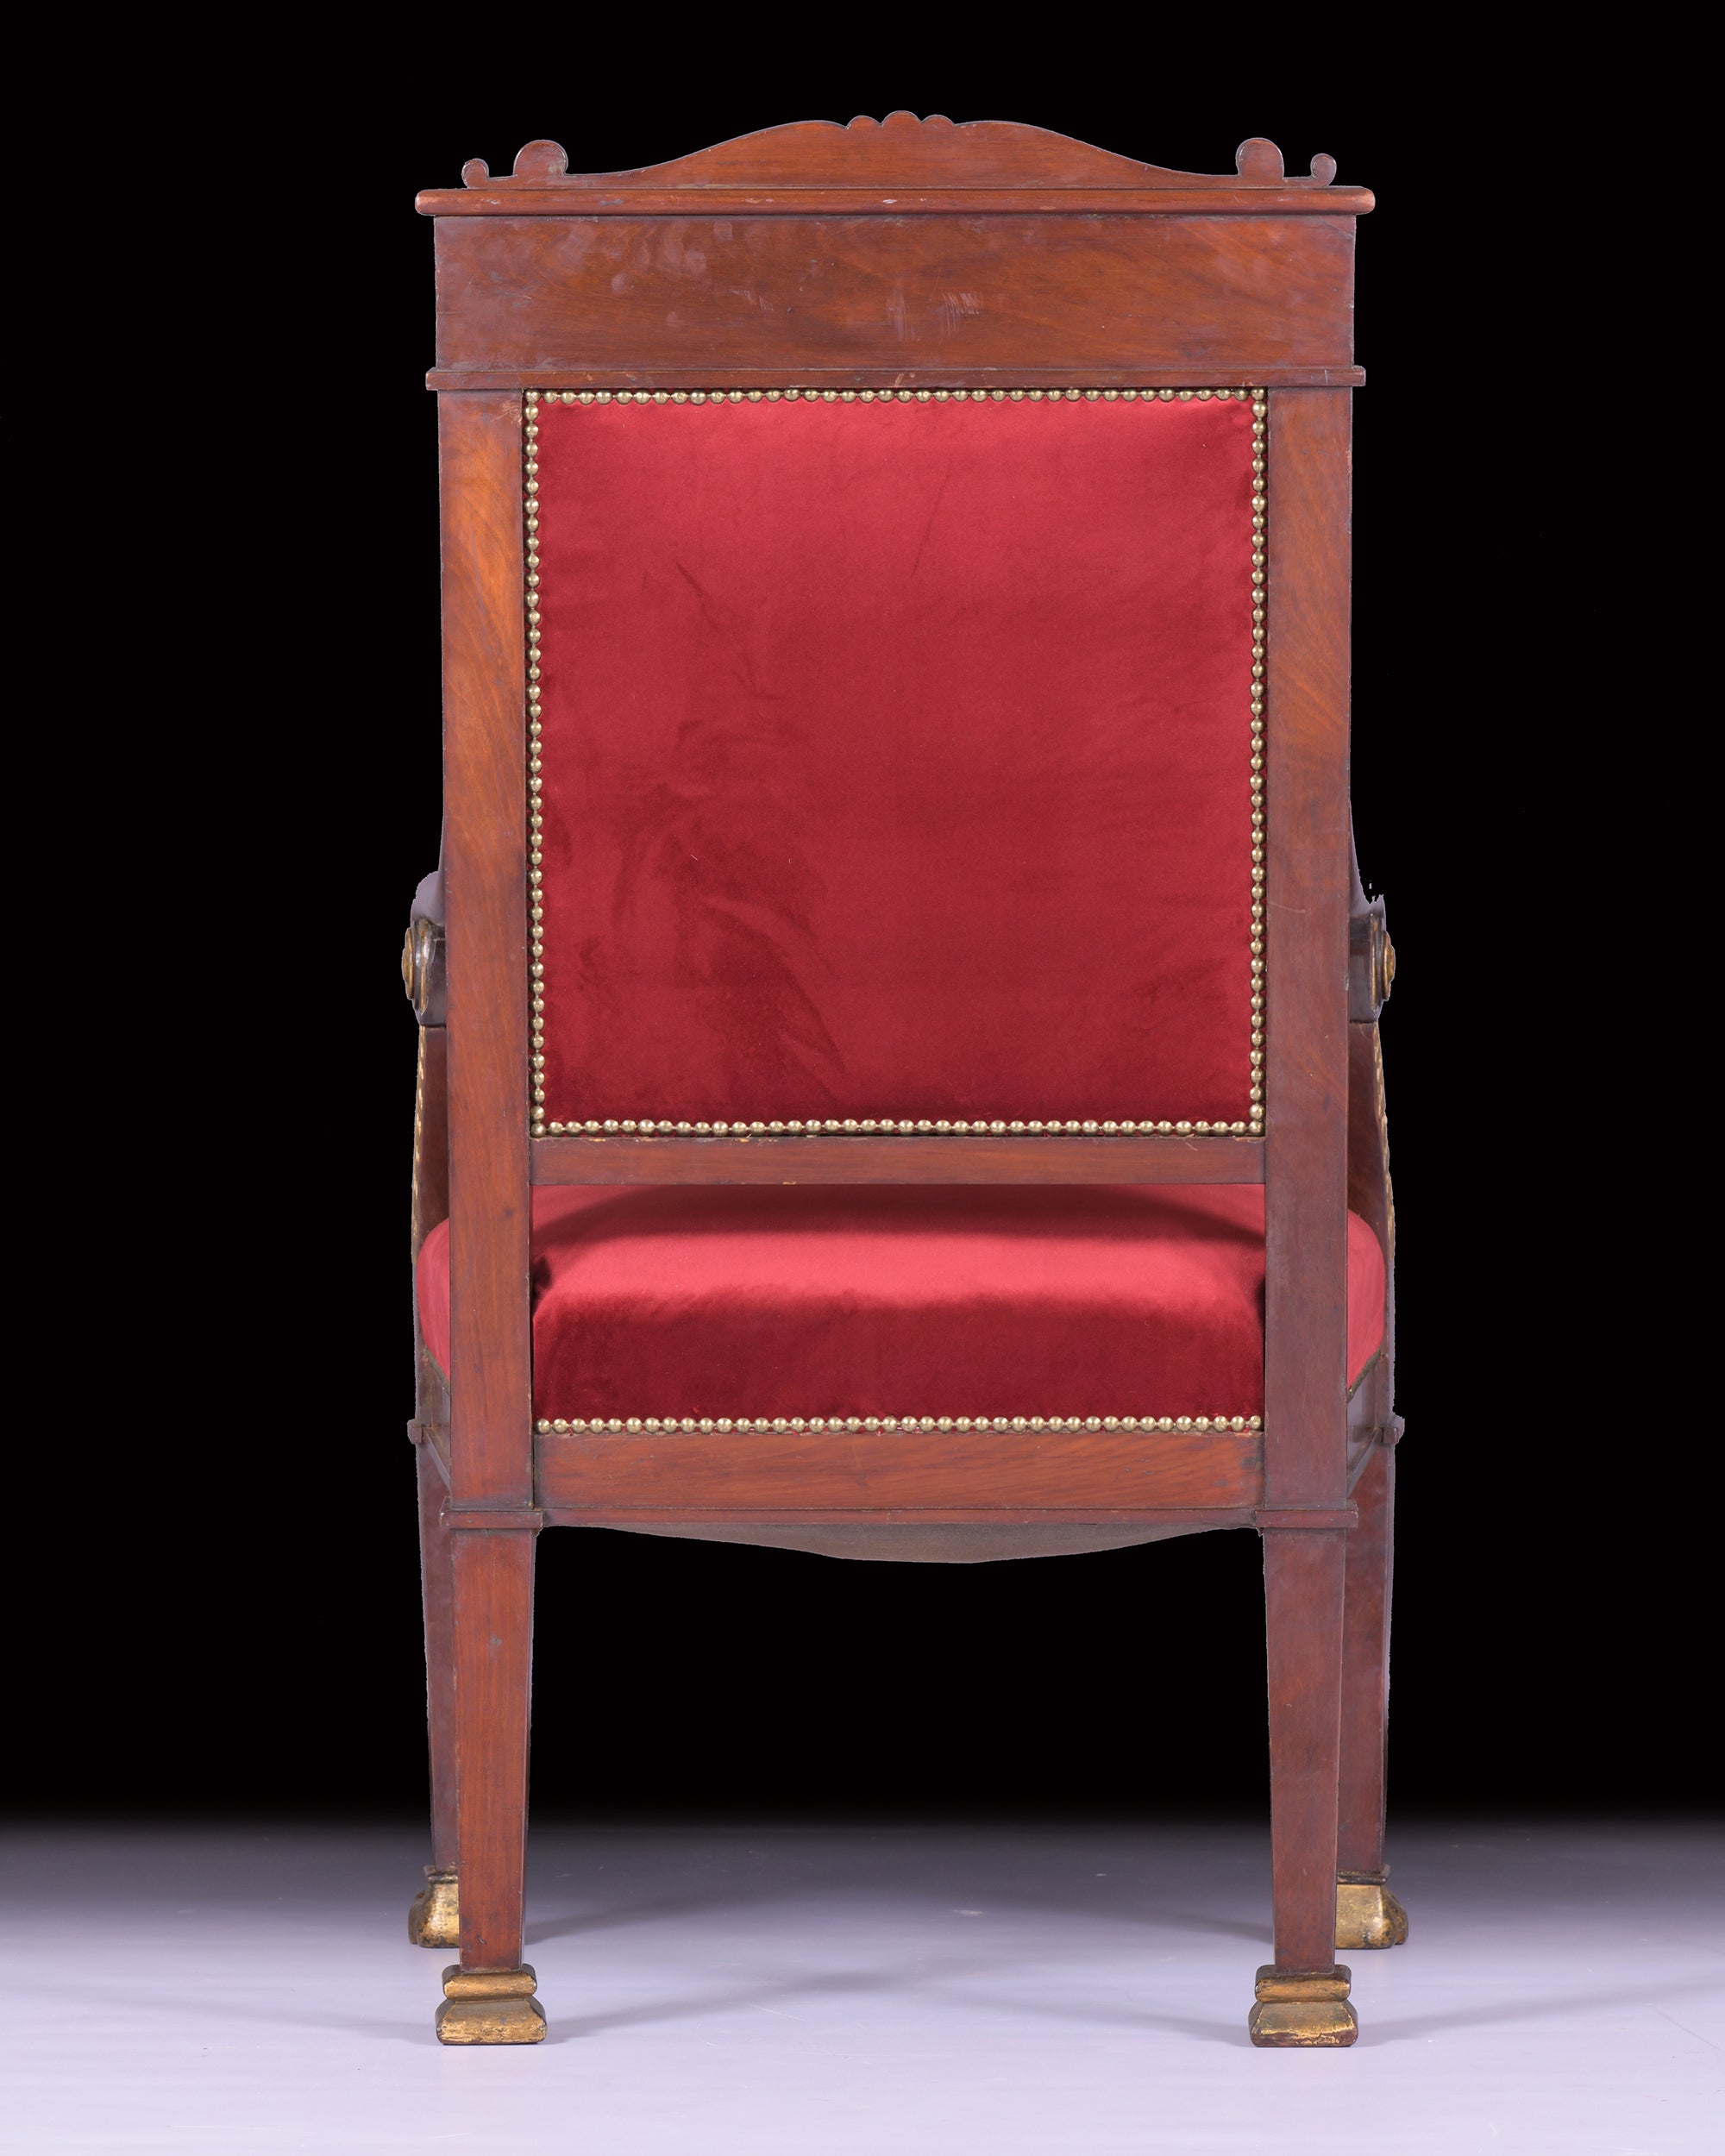 PAIR OF FRENCH EMPIRE ARMCHAIRS ATTRIBUTED TO JACOB-DESMALTER    - REF No. 8023